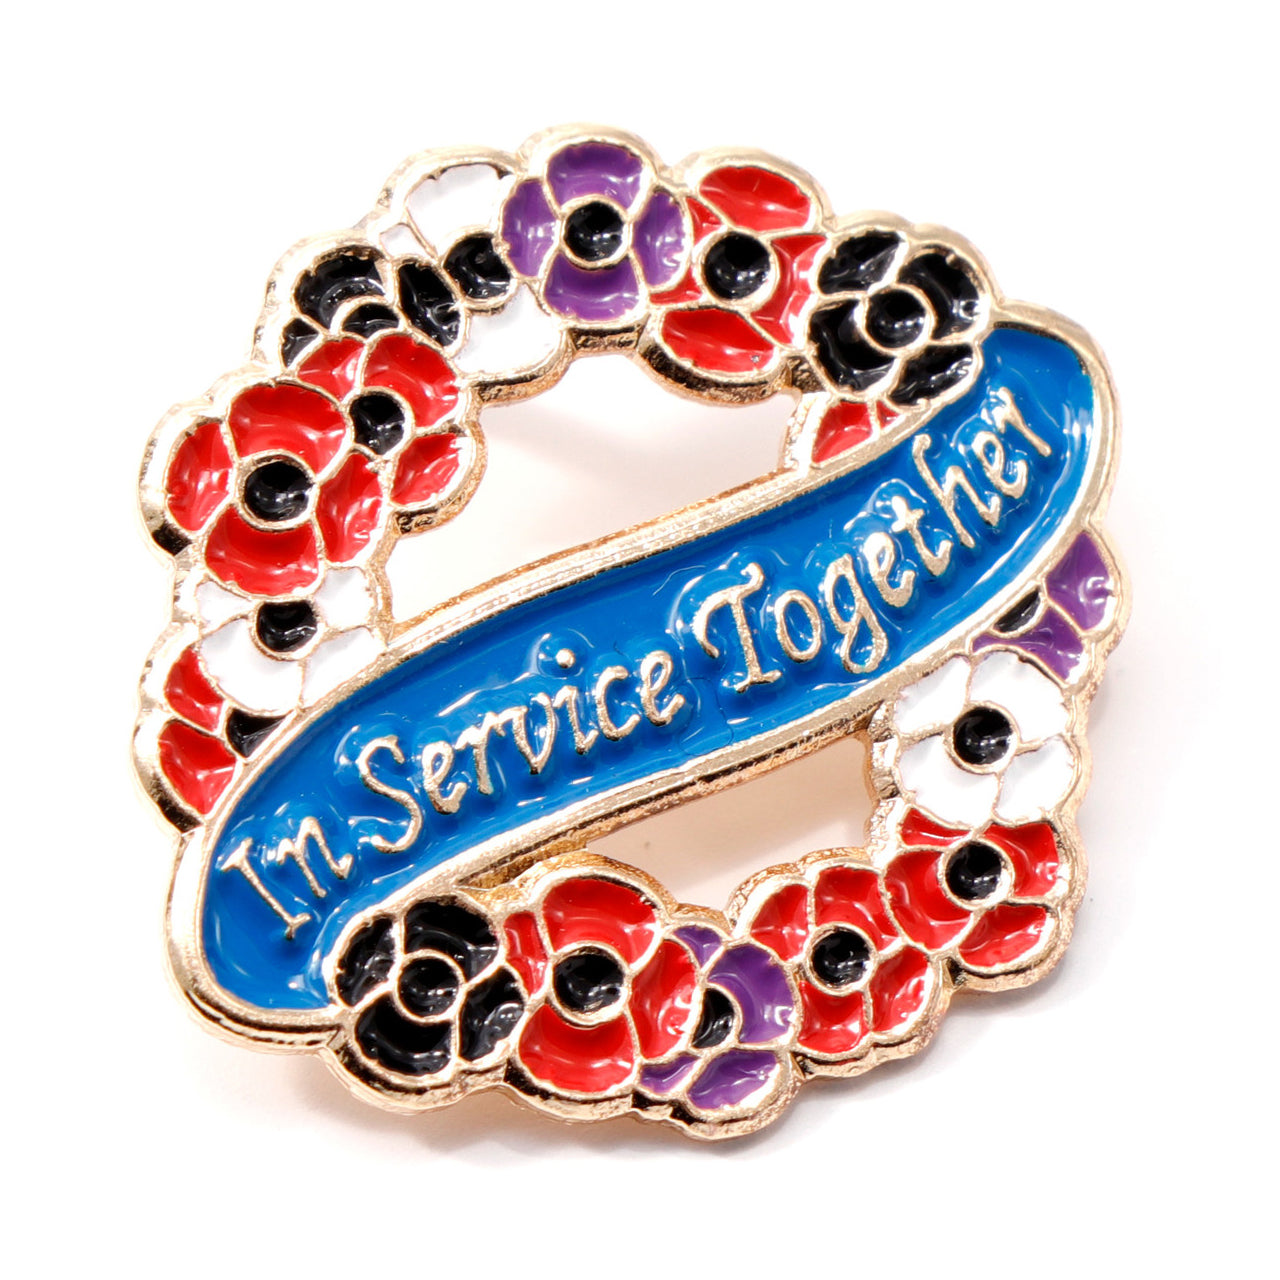 This beautiful and intricate lapel pin is a perfect way to honour the wide range of people, communities, and companions who come together to serve Australia. www.defenceqstore.com.au